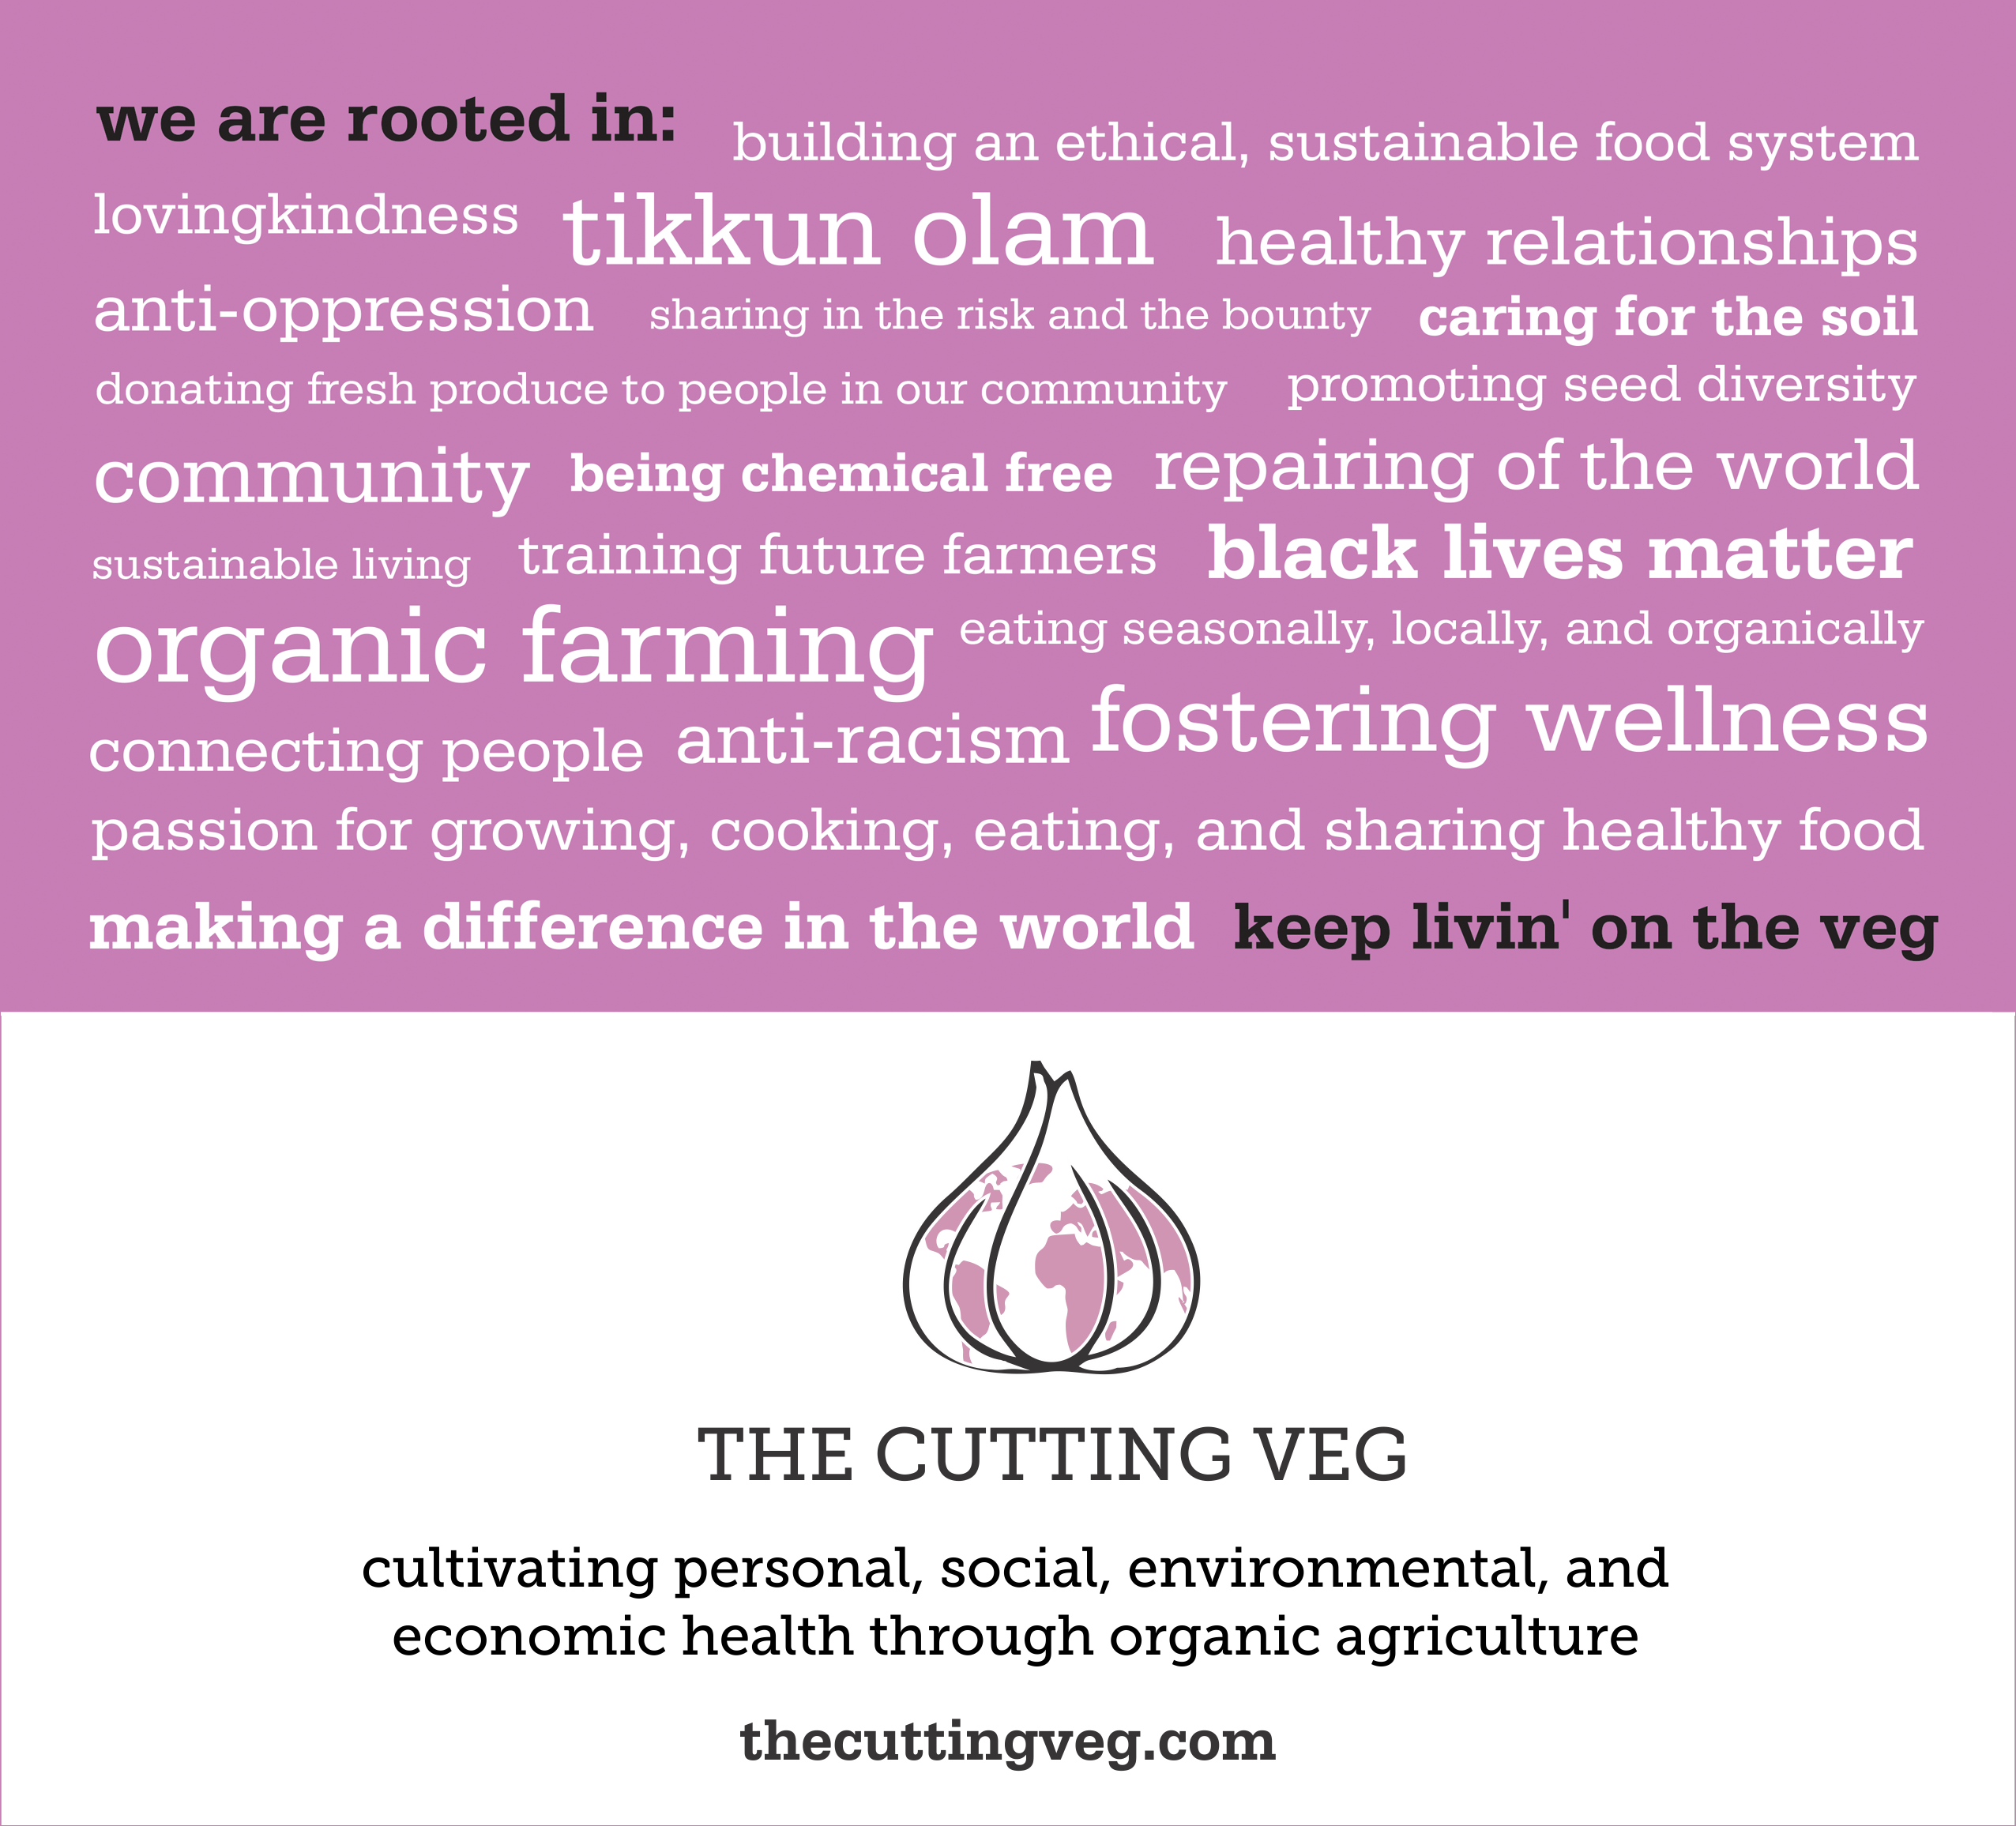 Cultivating personal, social, environmental, and economic health through organic agriculture